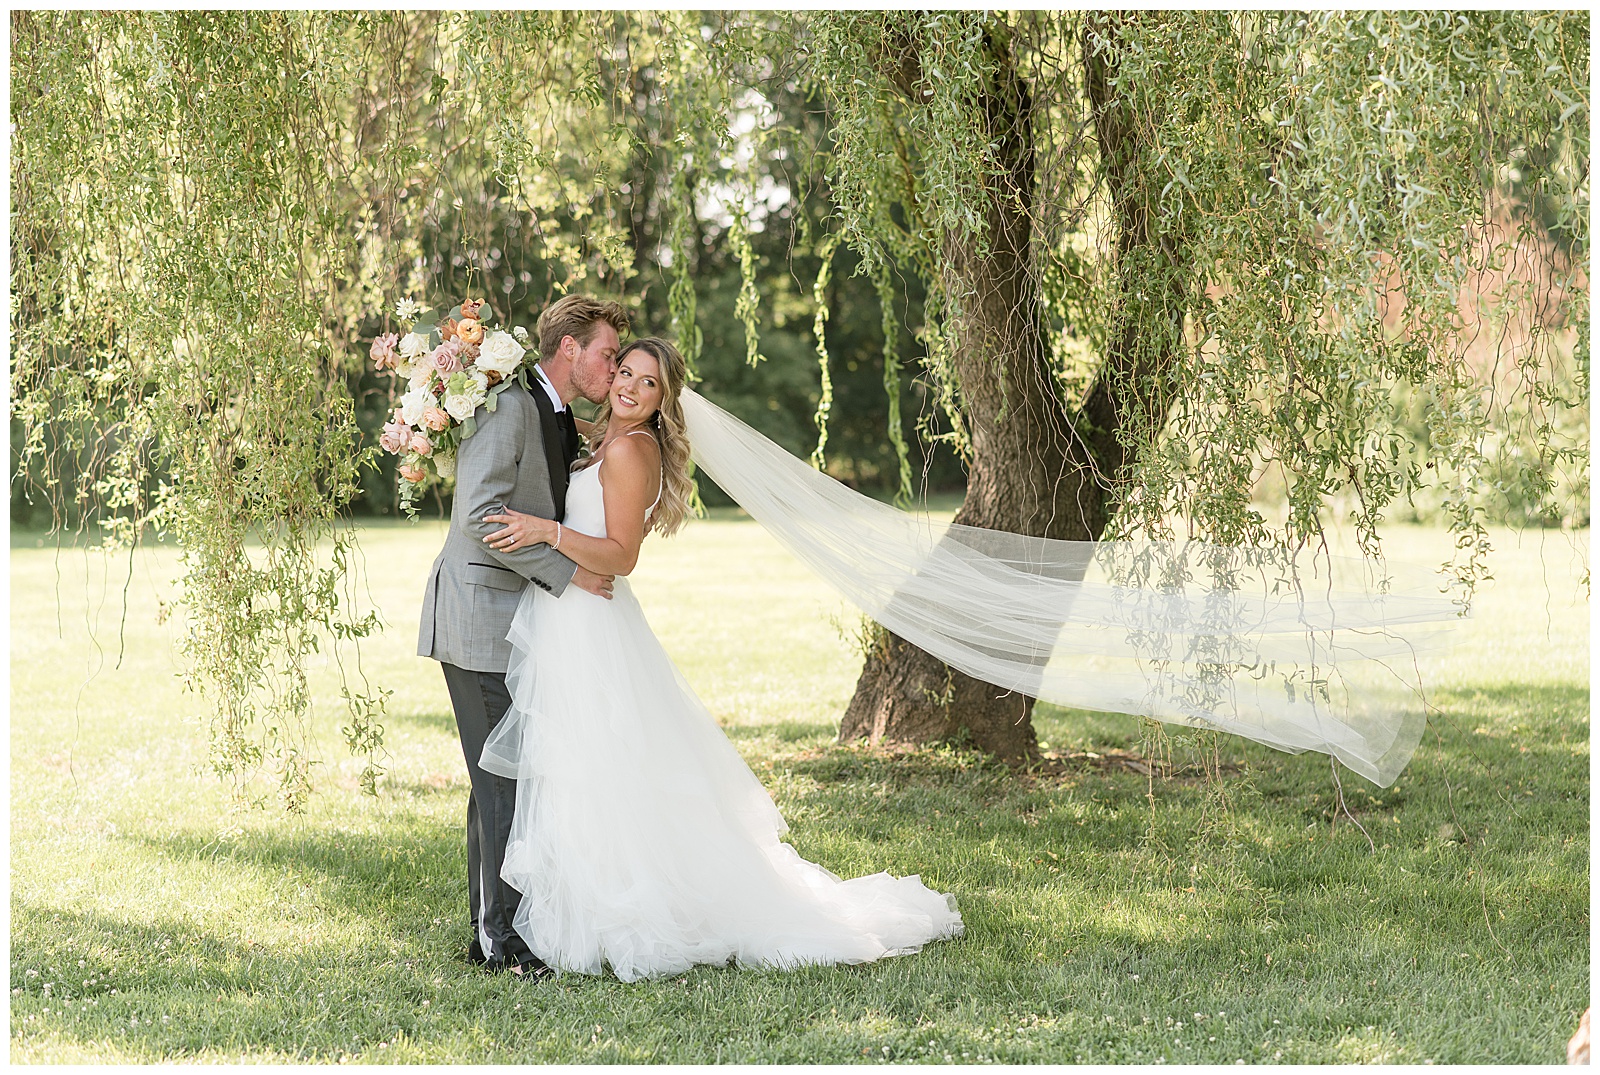 groom kissing his bride on her right cheek as she smiles with long veil blowing behind her under willow tree in lancaster county